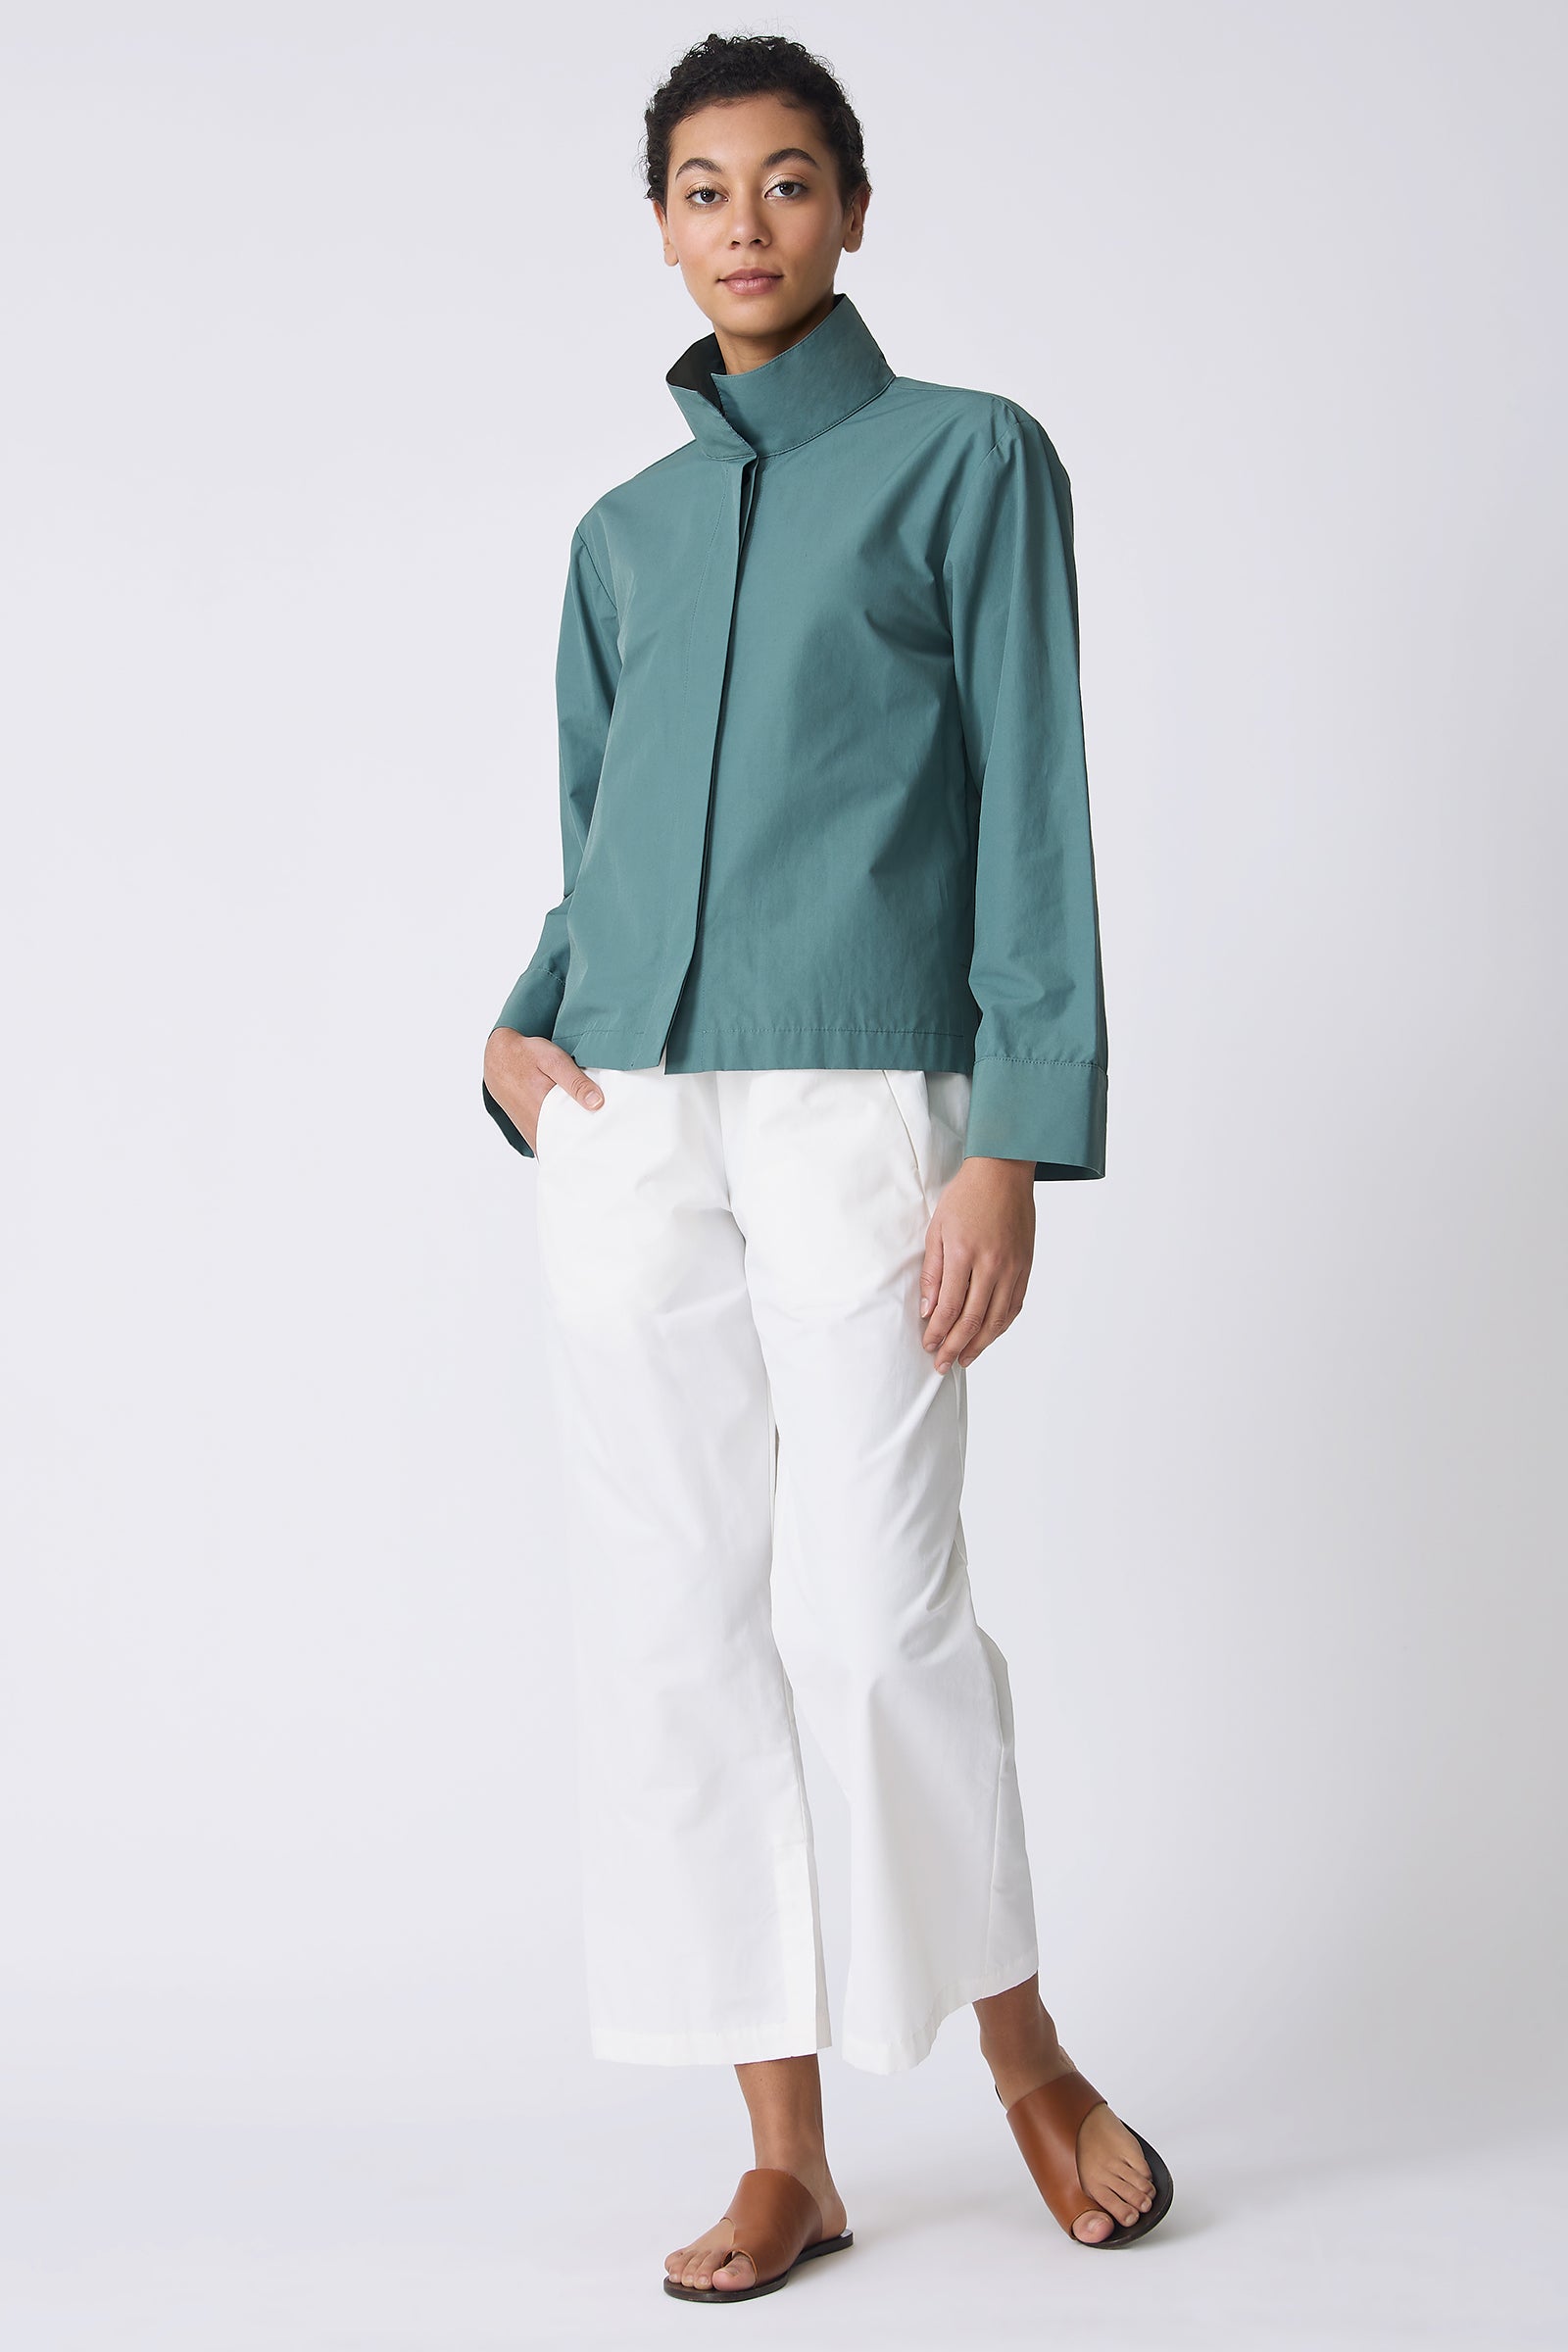 Kal Rieman Peggy Collared Shirt in Sage on model with hand in pocket full front view